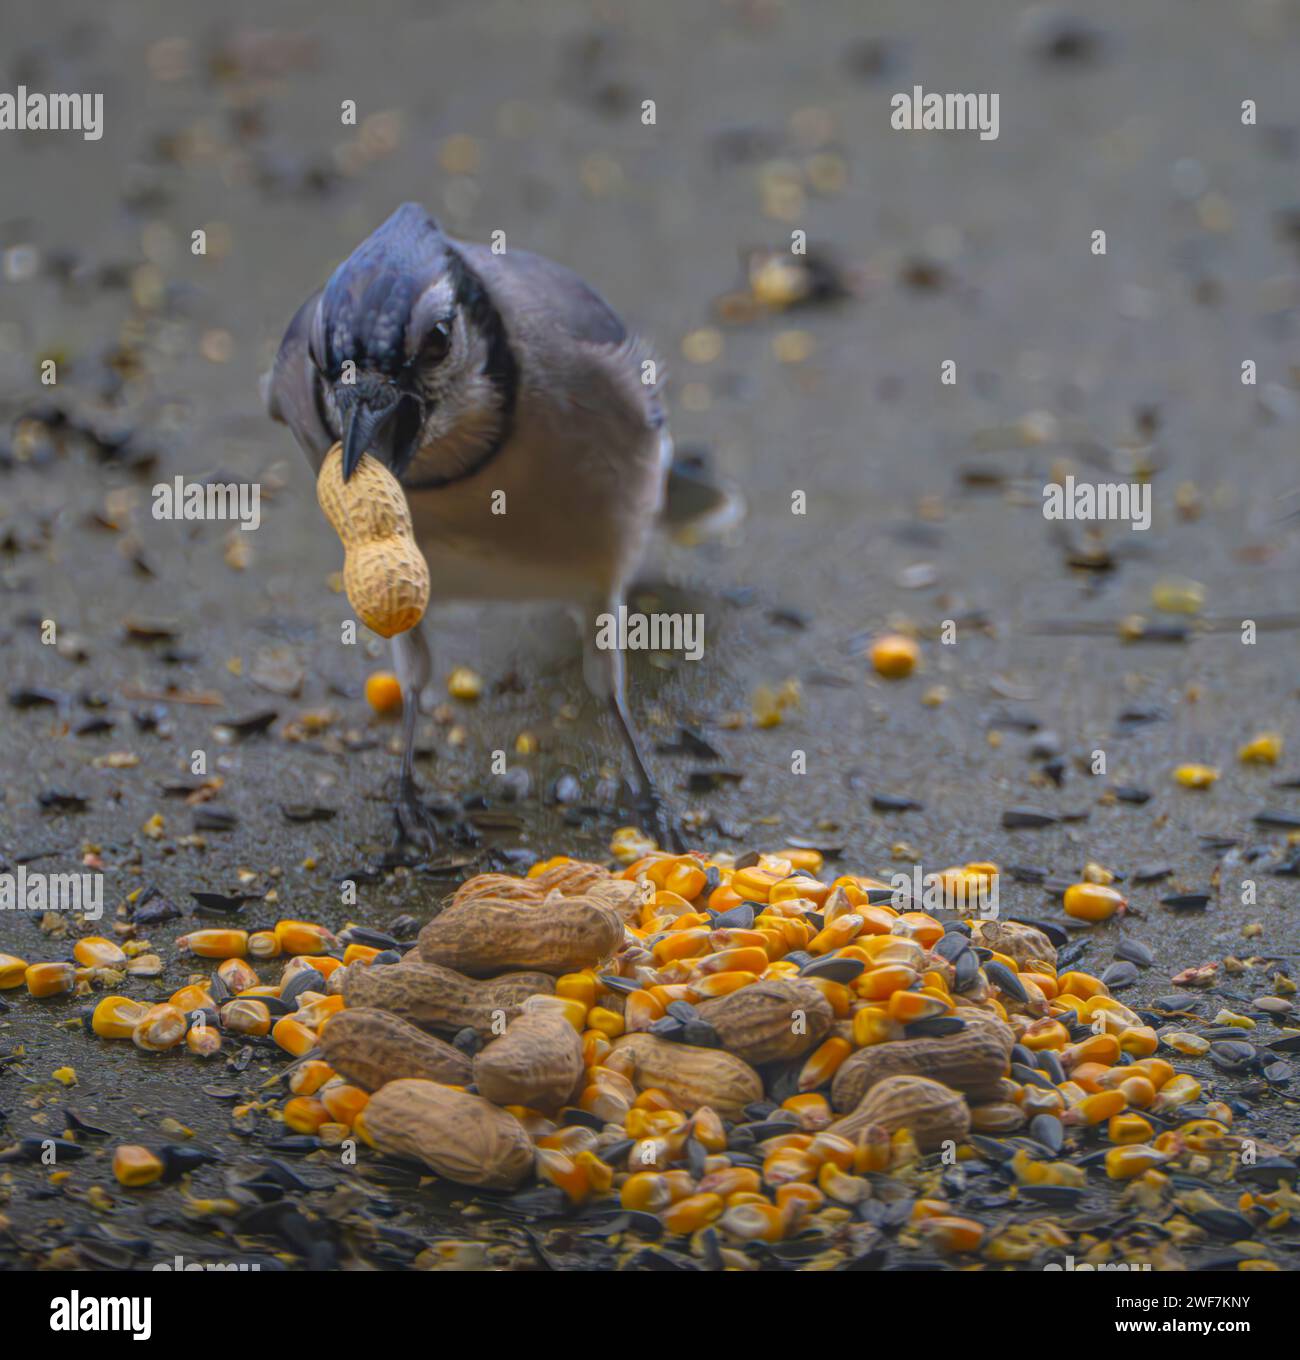 A blue jay (Cyanocitta cristata) feeding on kernels and peanuts on the ground Stock Photo